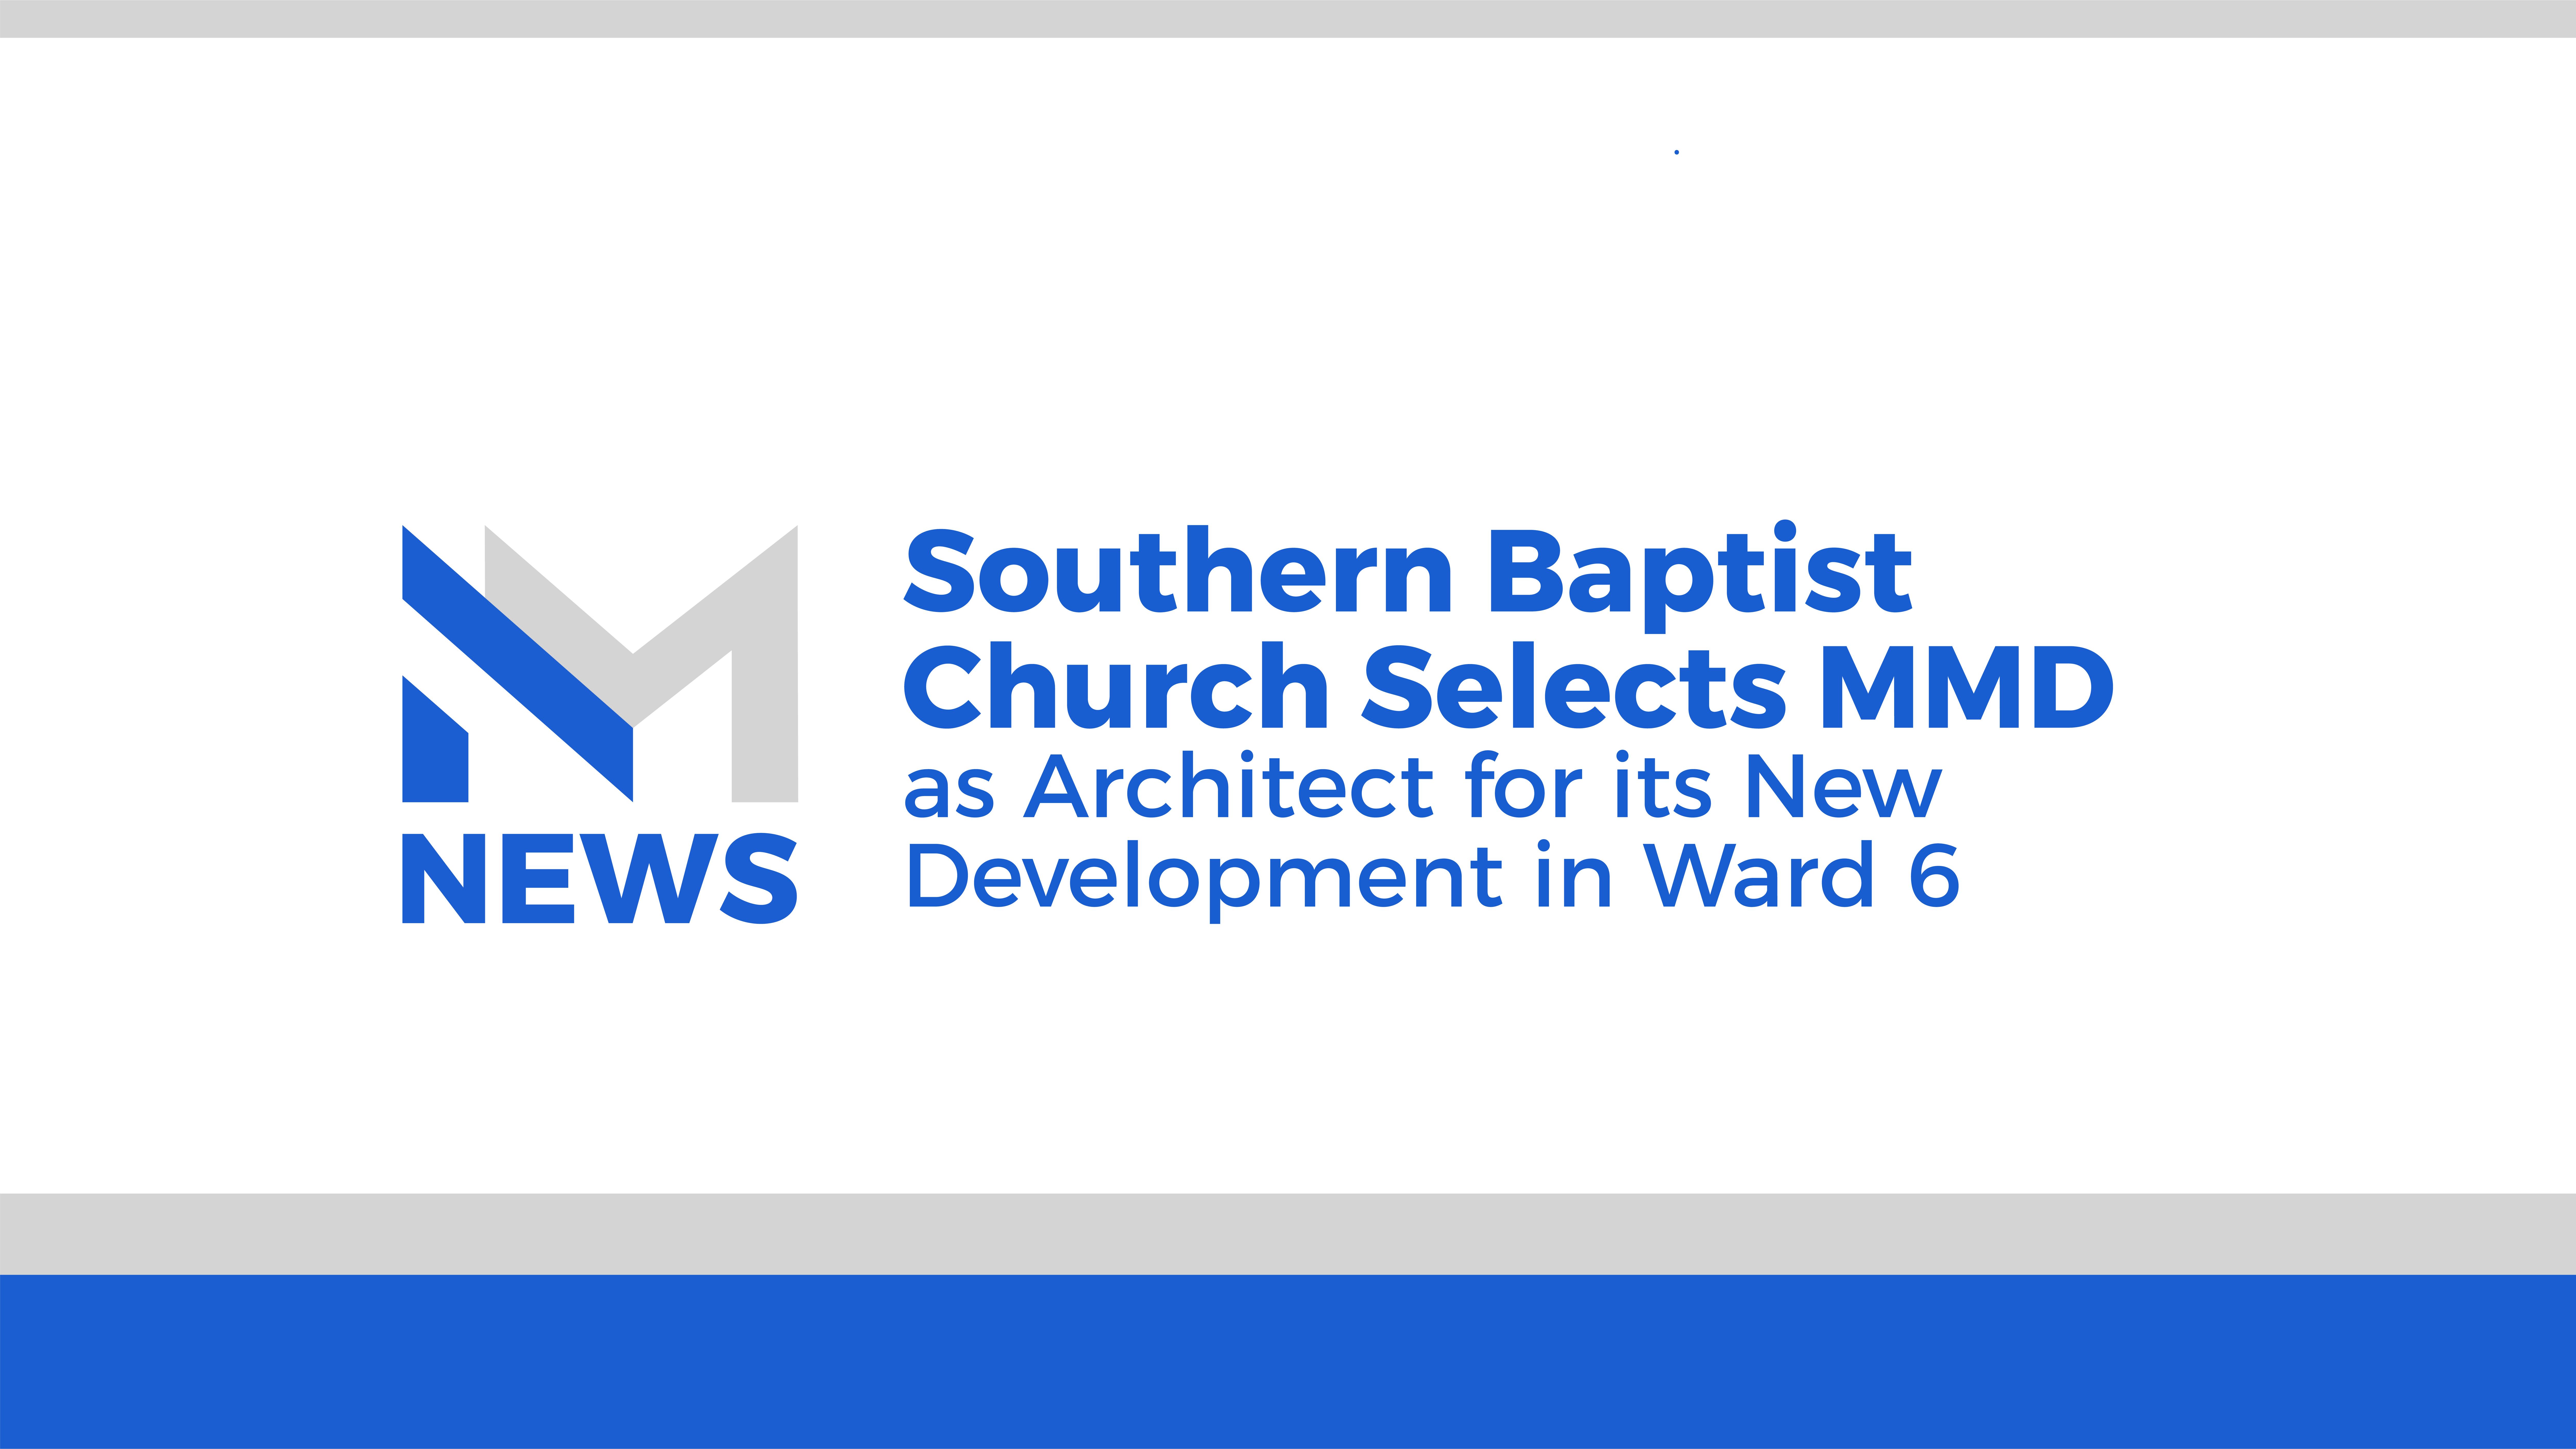 Southern Baptist Church Selects MMD as Architect for its New Development in Ward 6